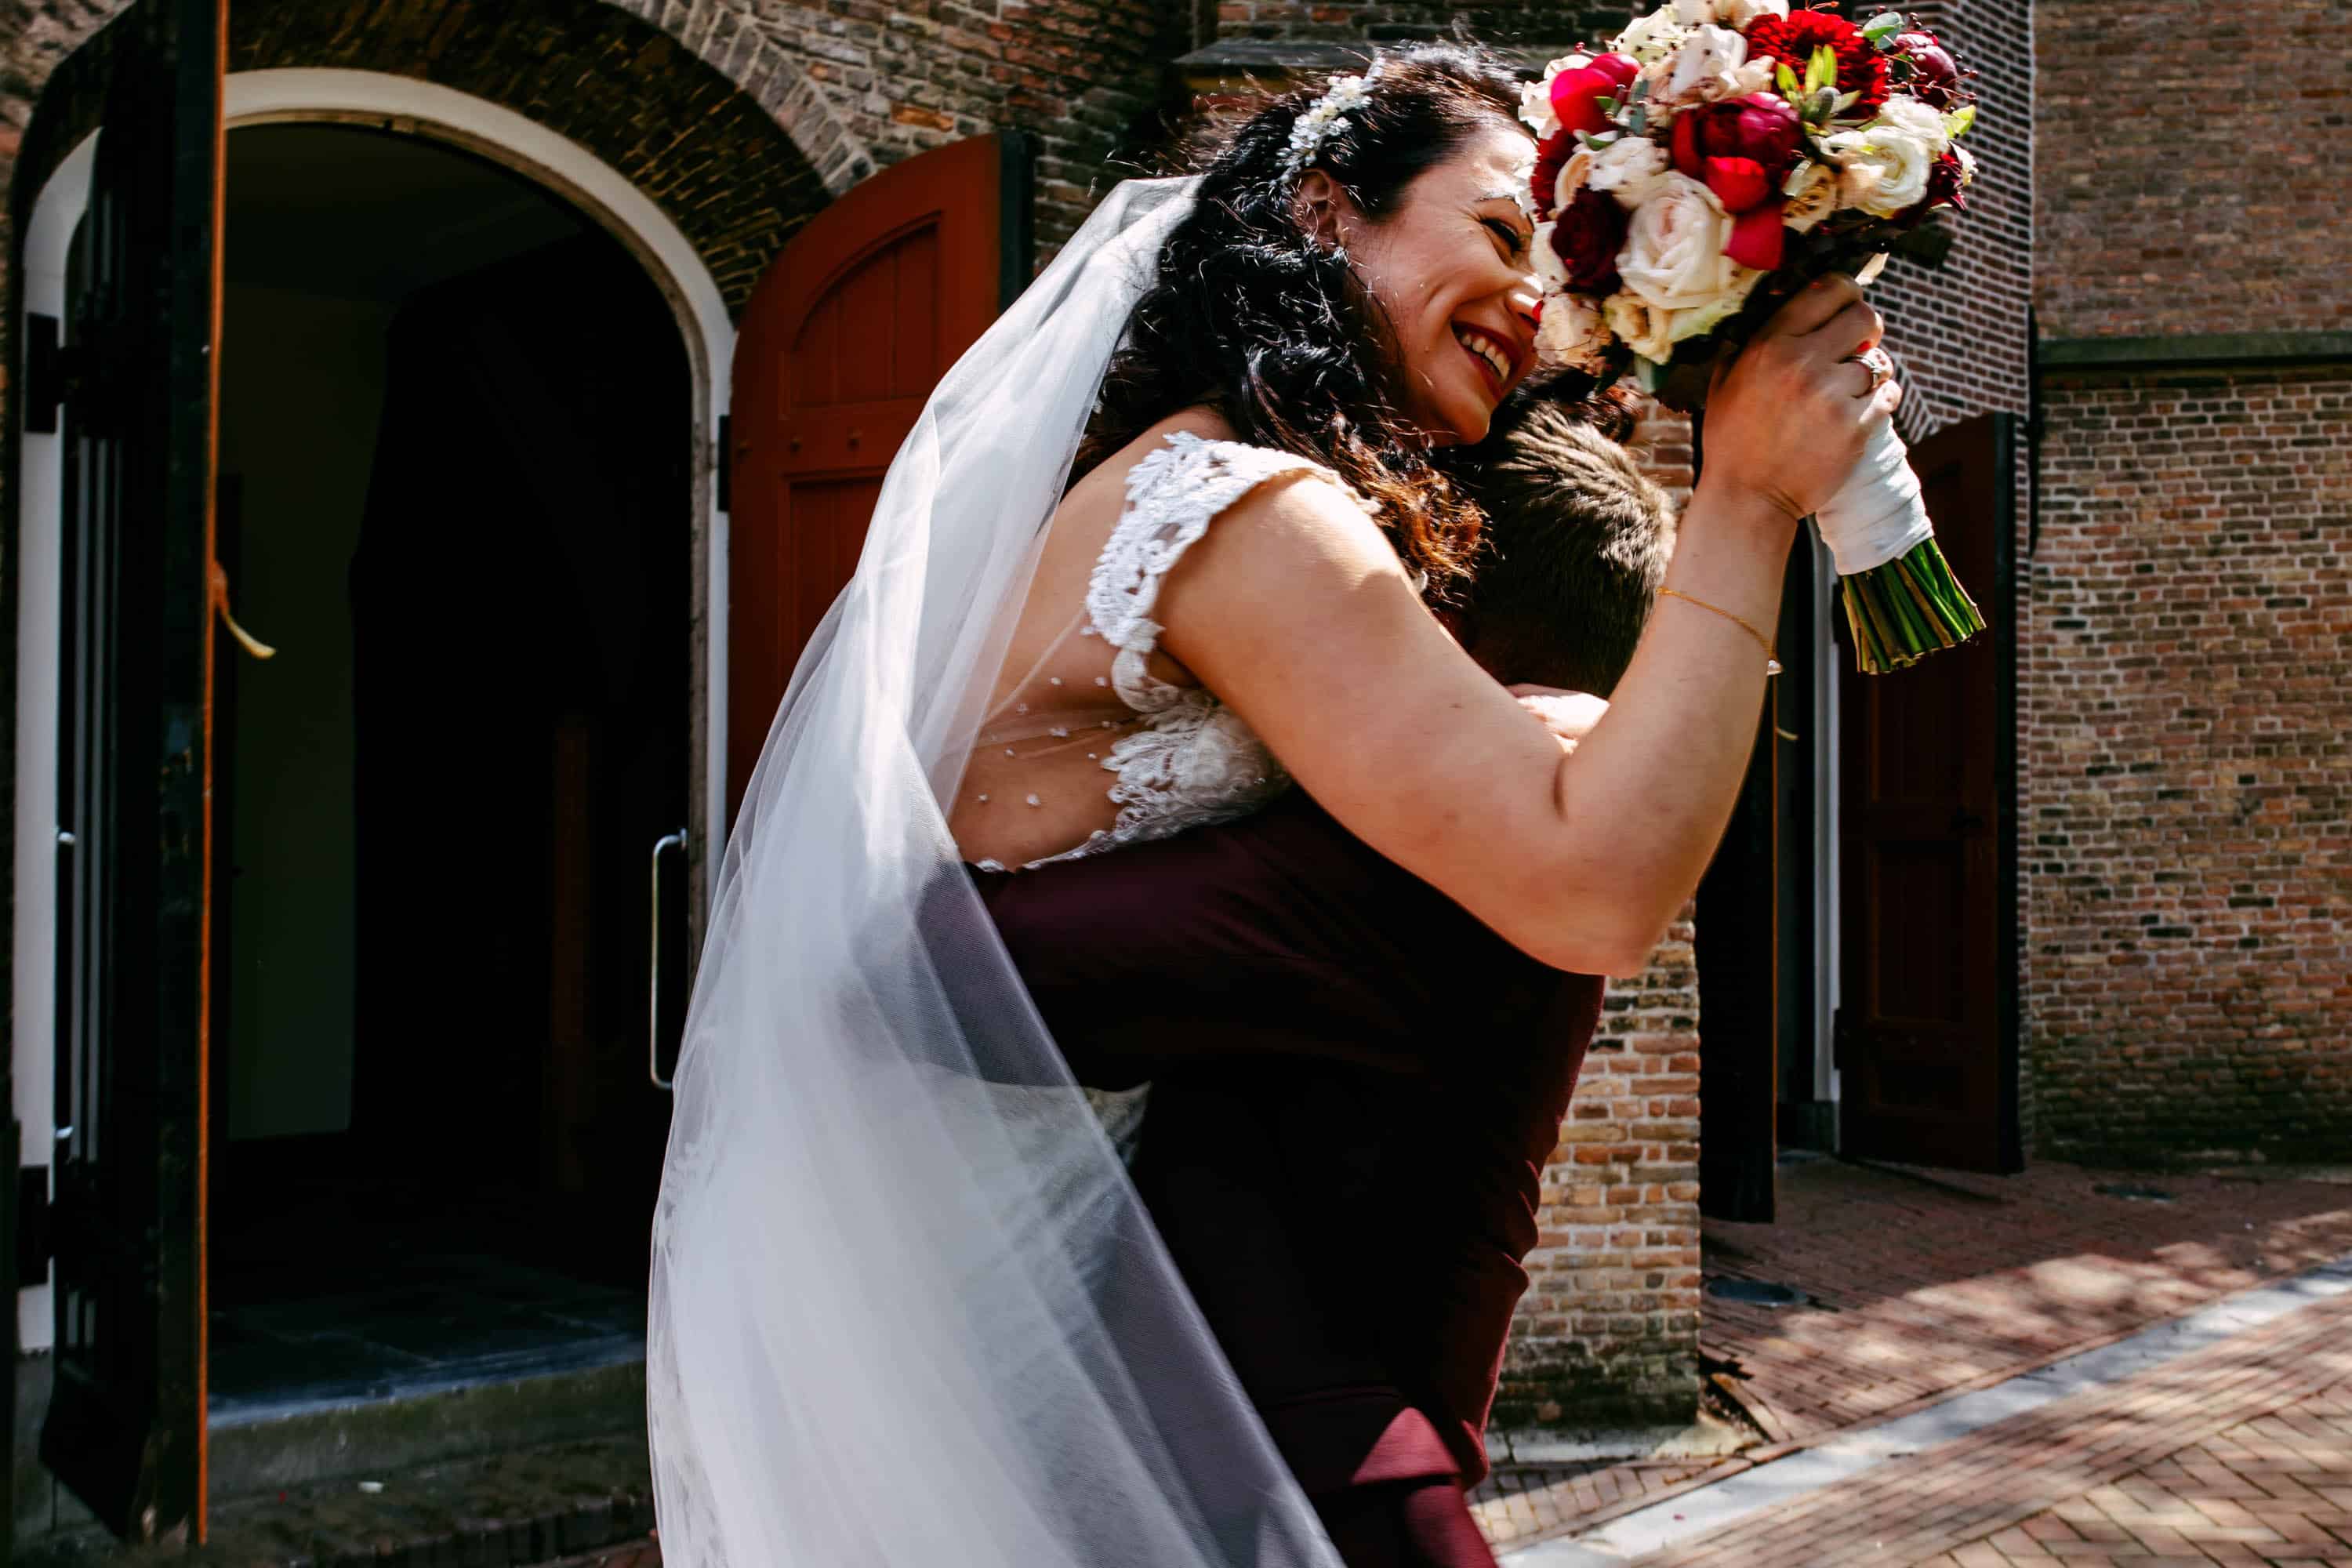 A bride and groom hug in front of a church.